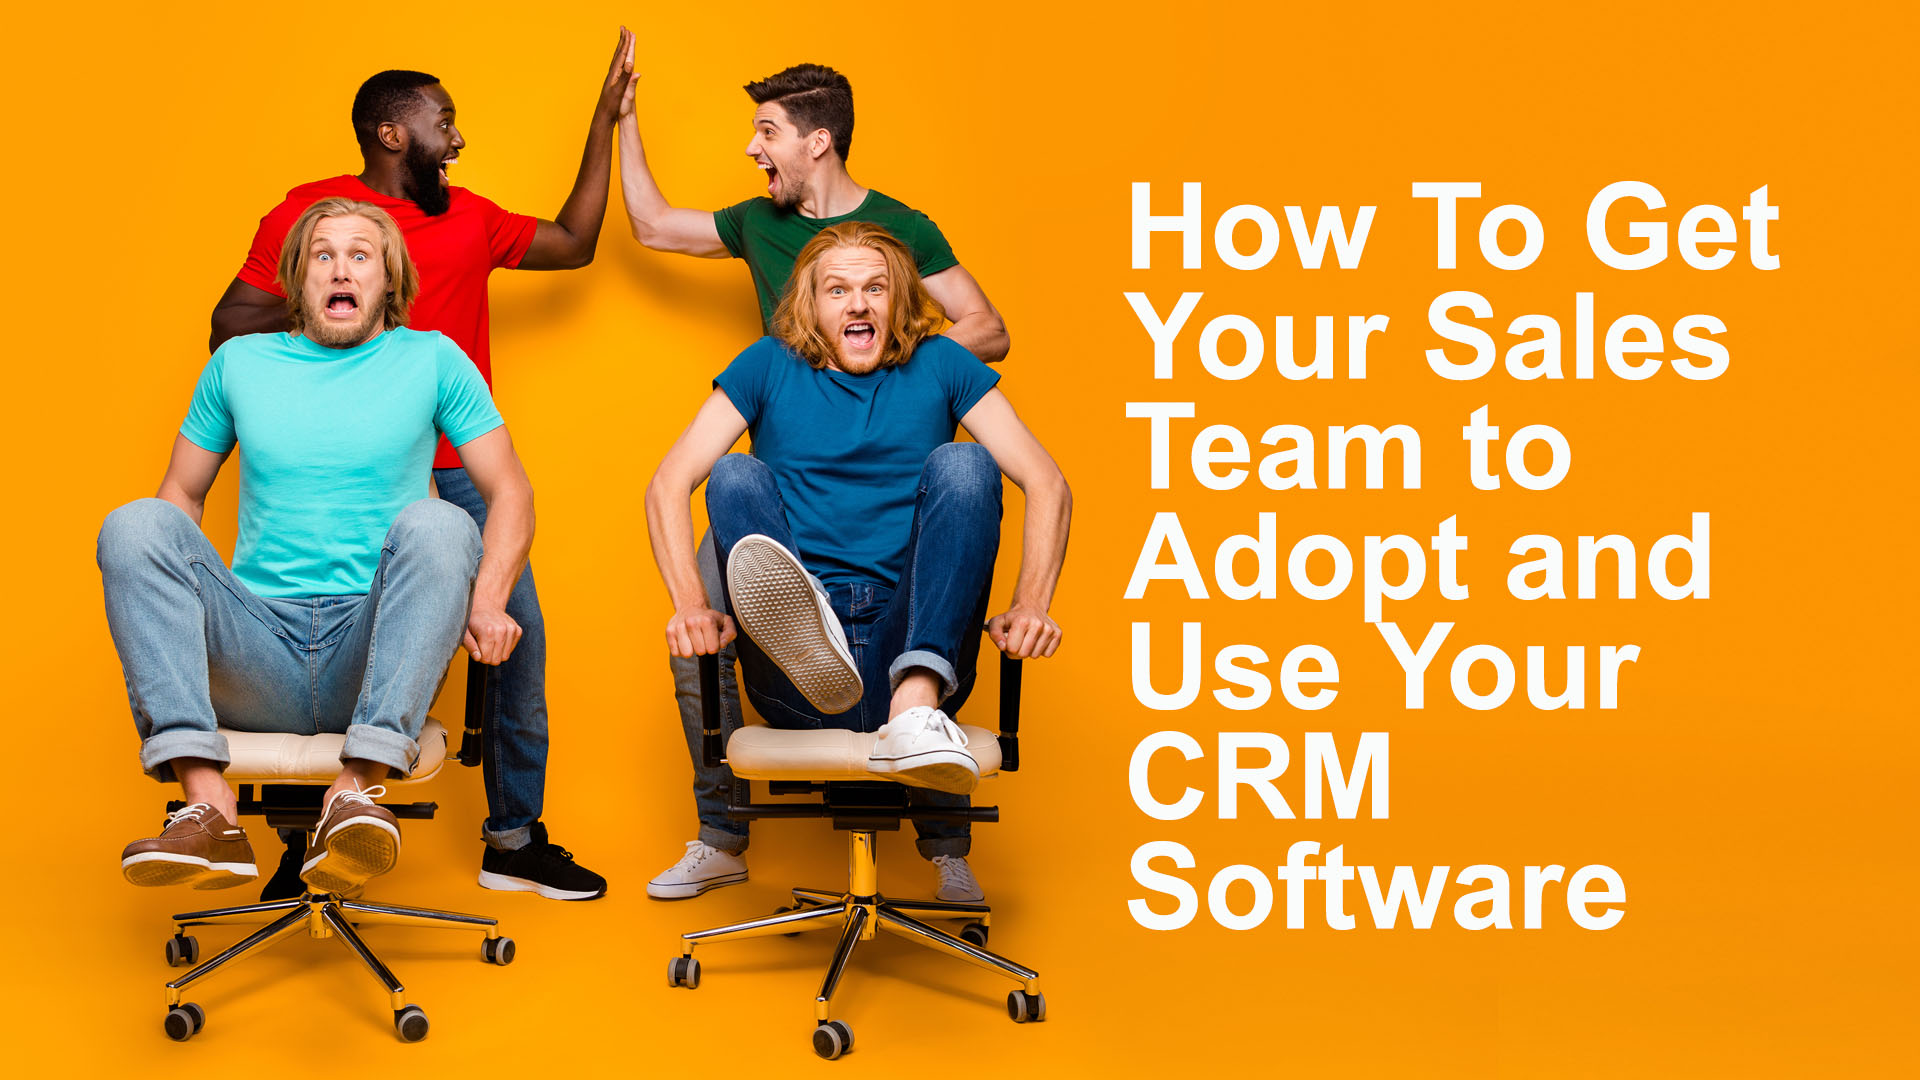 How To Get Your Sales Team to Adopt and Use Your CRM Software